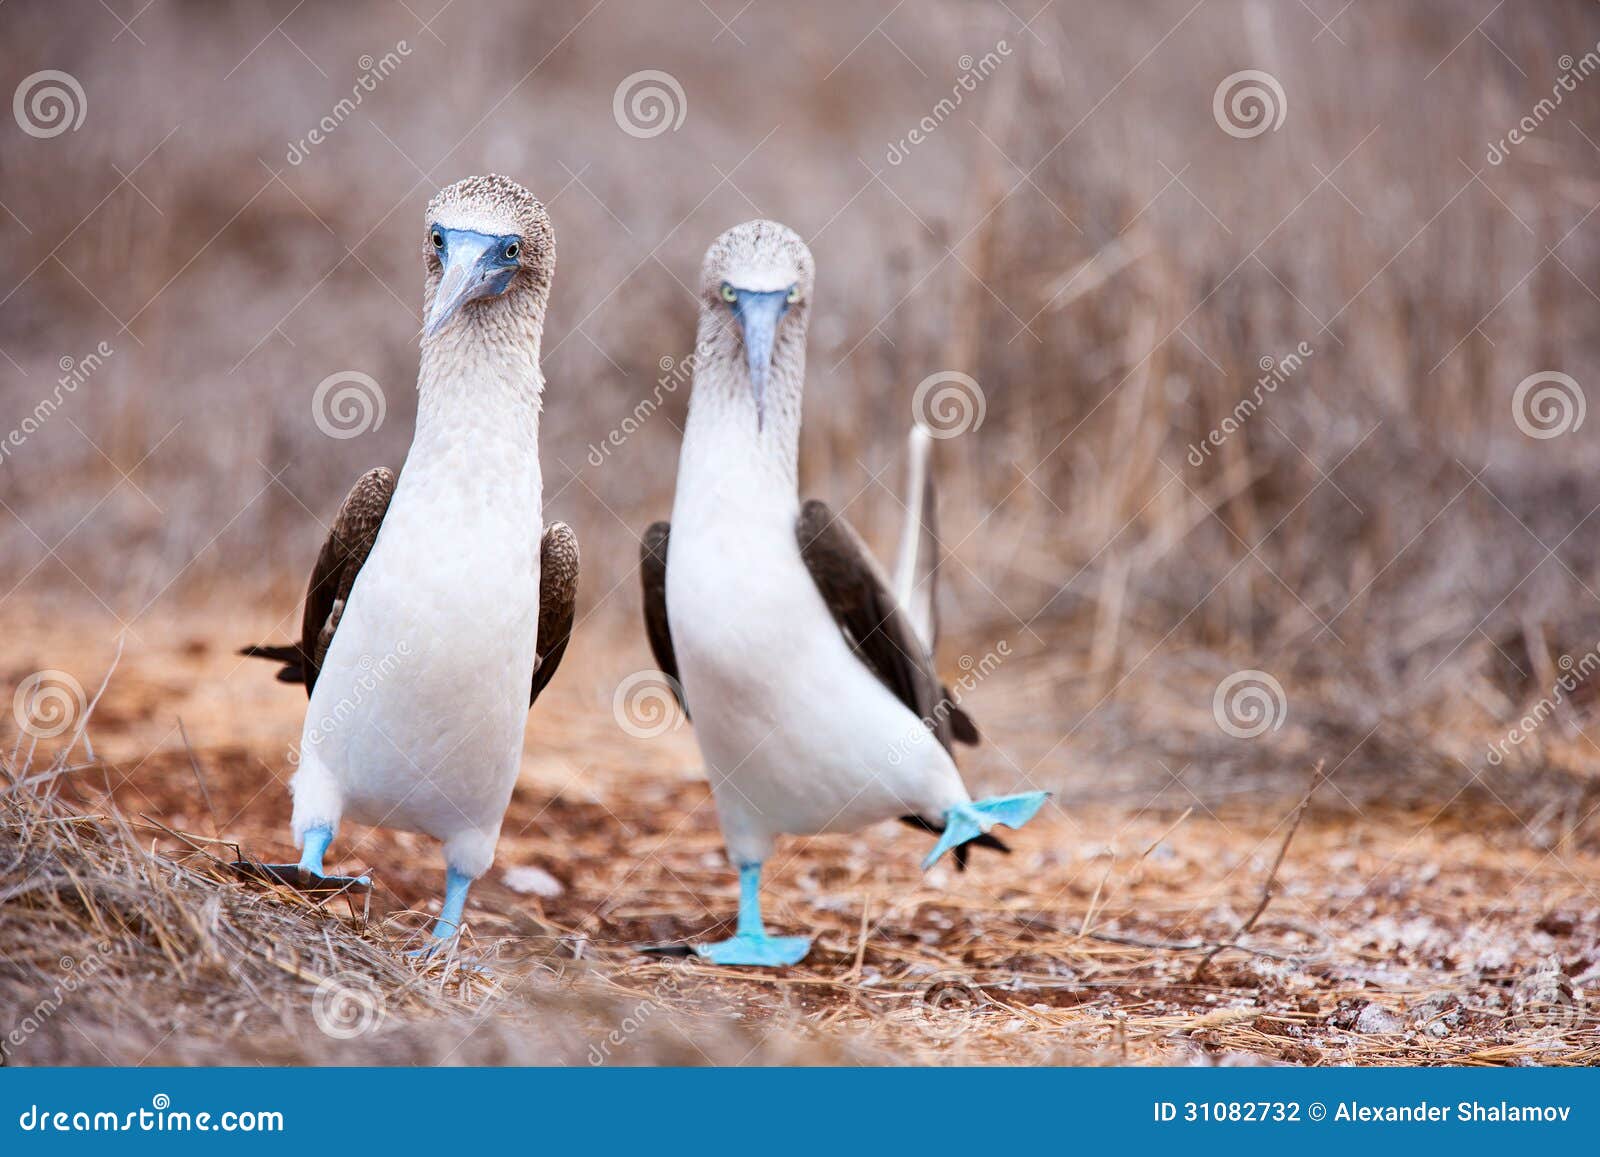 blue footed booby mating dance